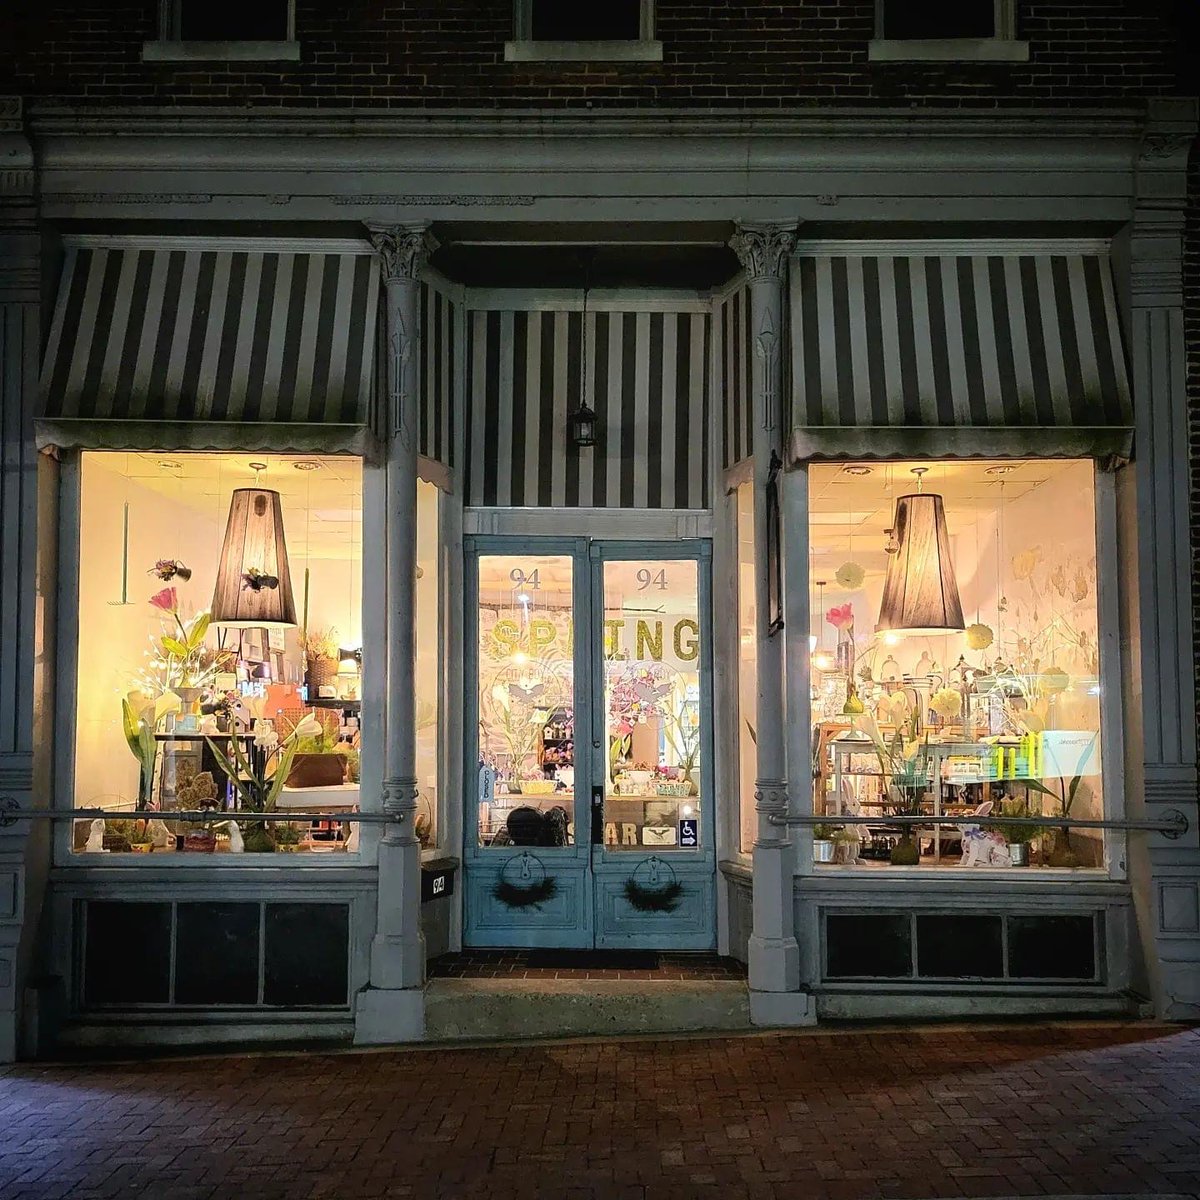 Downtown storefronts are ready for Spring! City Boy County Life is opening in its new location at 94 Franklin St. on Saturday. 

#spring #shopping #clarksvilletn #visitclarksvilletn #elevate #storefront #cityboycountrylife